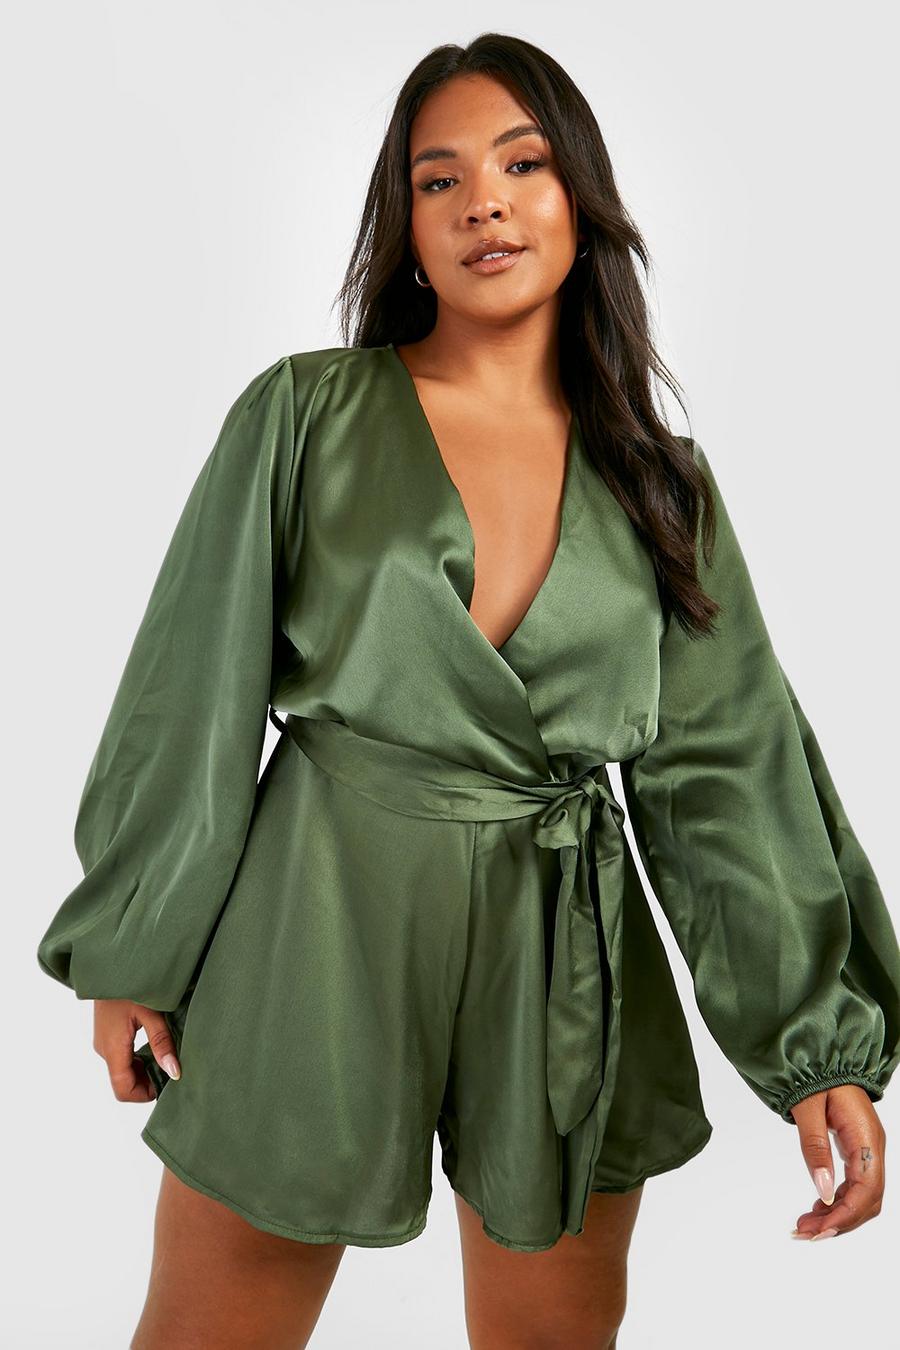 Boohoo Satin Twist Blouson Sleeve Romper in Black Womens Clothing Jumpsuits and rompers Playsuits 